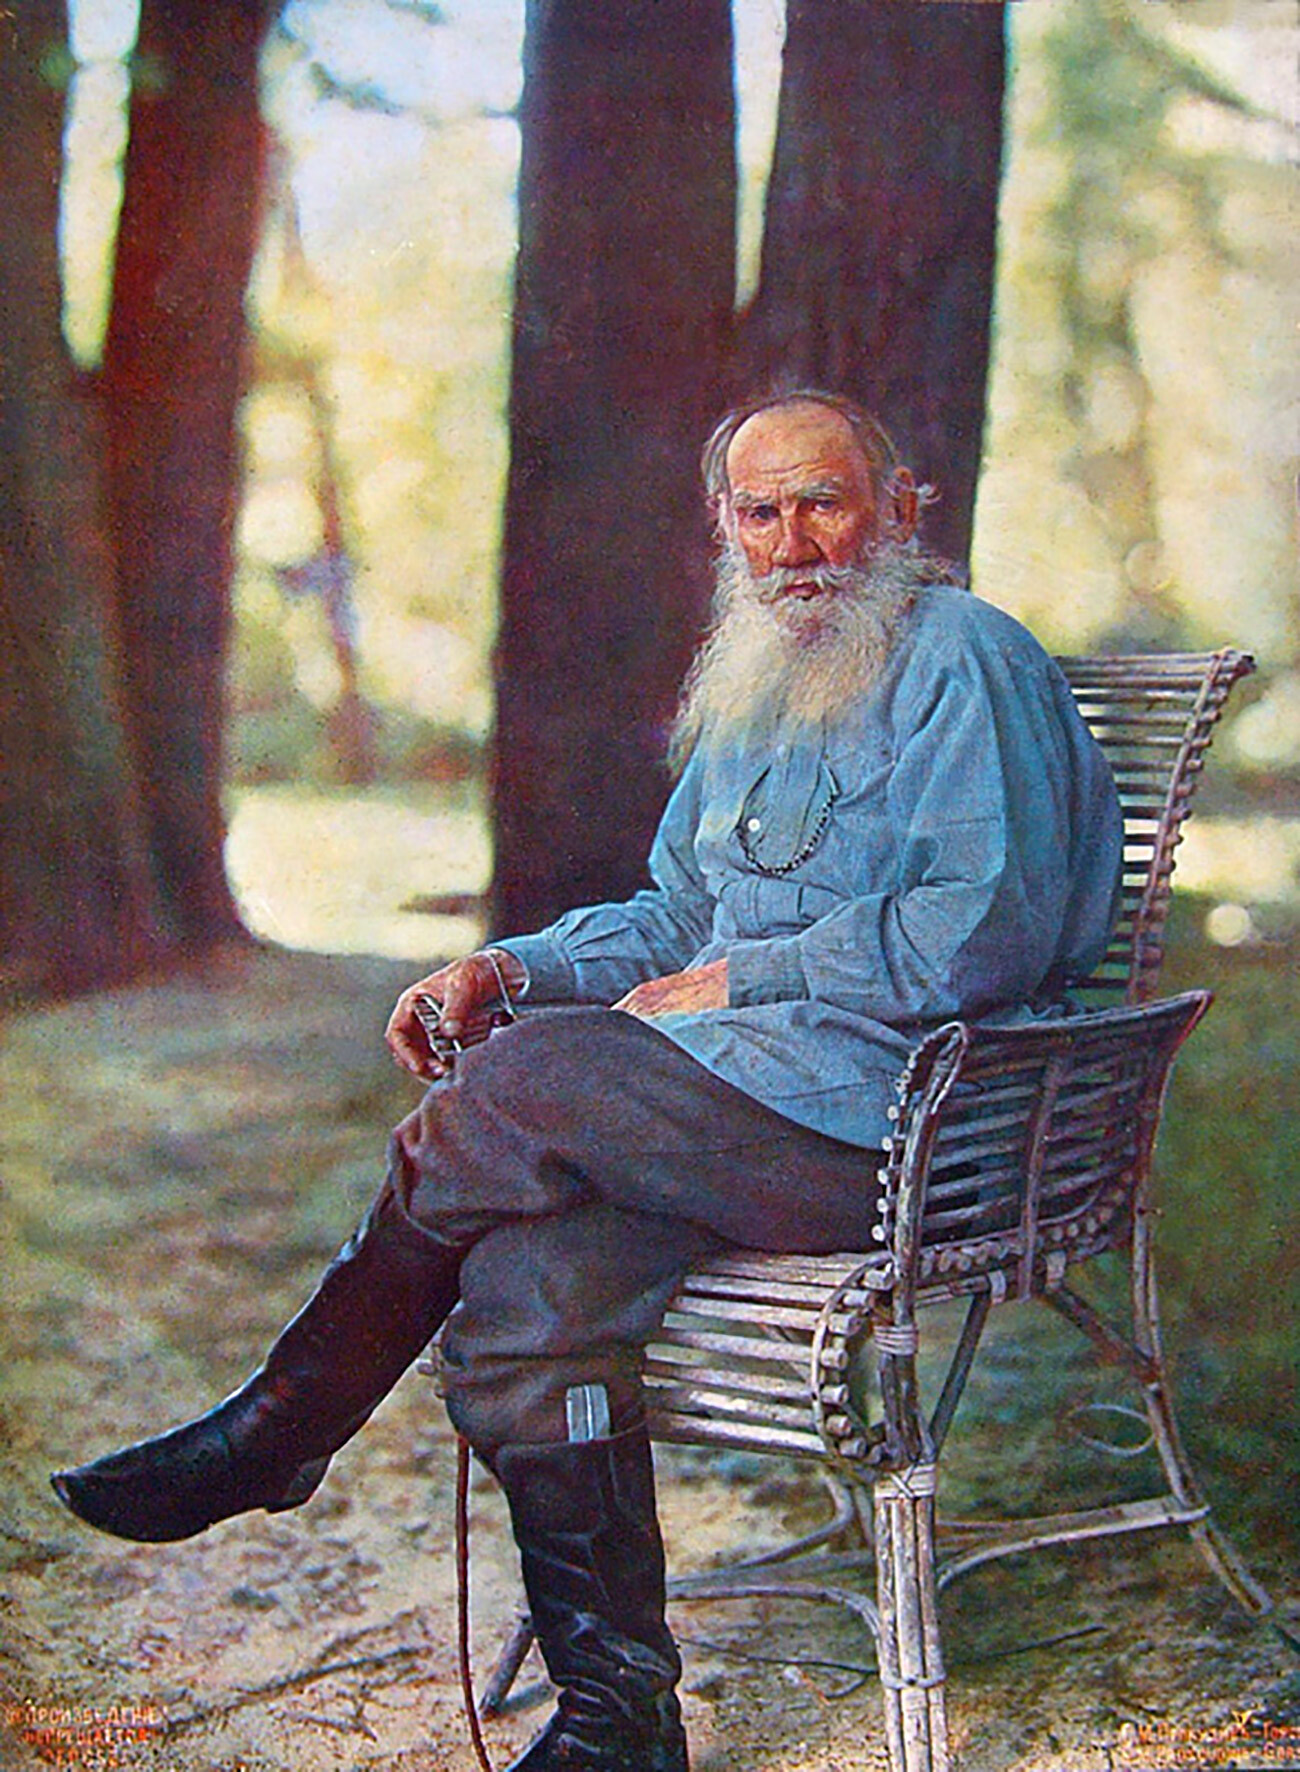  Yasnaya Polyana. Color portrait of Leo Tolstoy taken after his return from horseback riding. First published in August issue of Notes of the Imperial Russian Technical Society. May 23, 1908. 